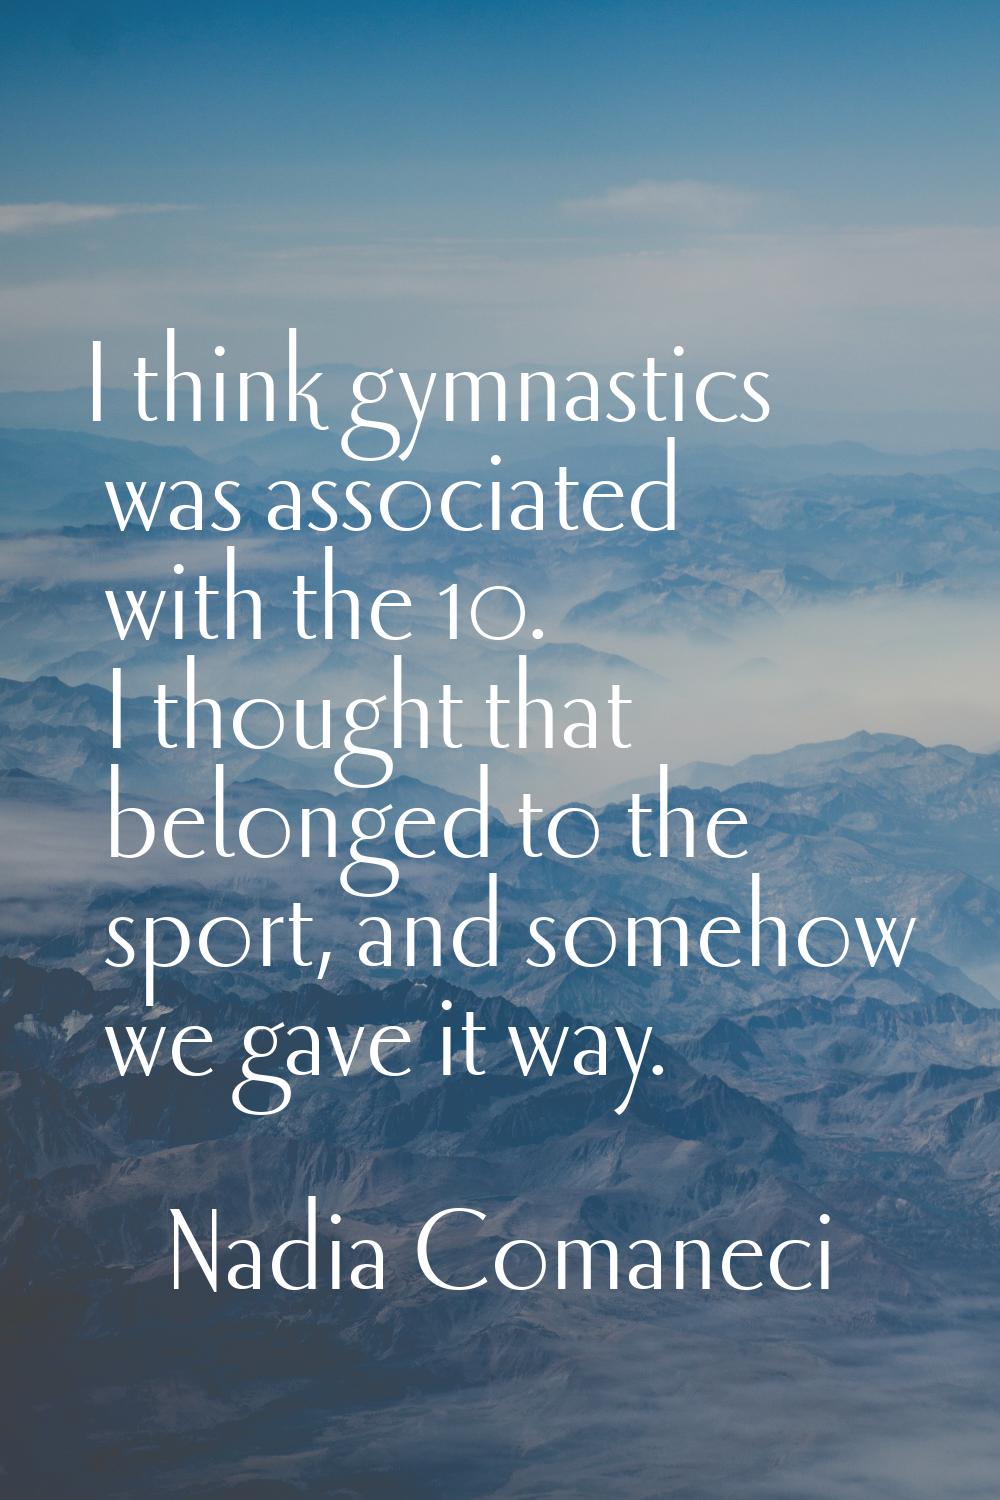 I think gymnastics was associated with the 10. I thought that belonged to the sport, and somehow we